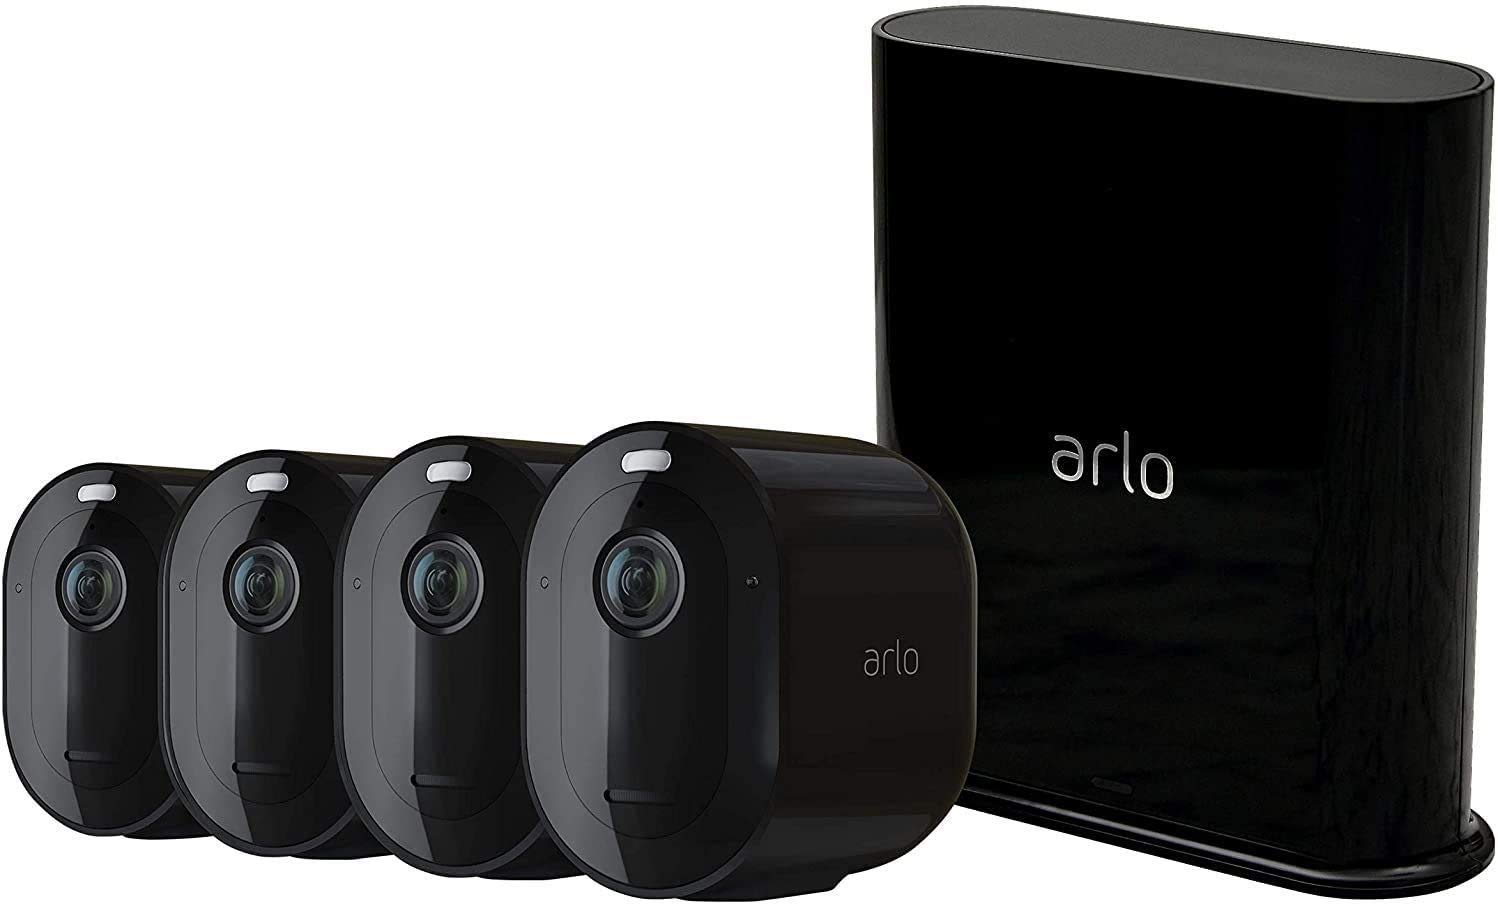 Arlo Pro3 Wireless Outdoor Home Security Camera System CCTV, 6-Month Battery, Colour Night Vision, 2K HDR, 2-Way Audio, Alarm, 4 Camera kit, With 90-day free trial of Arlo Secure Plan, Black